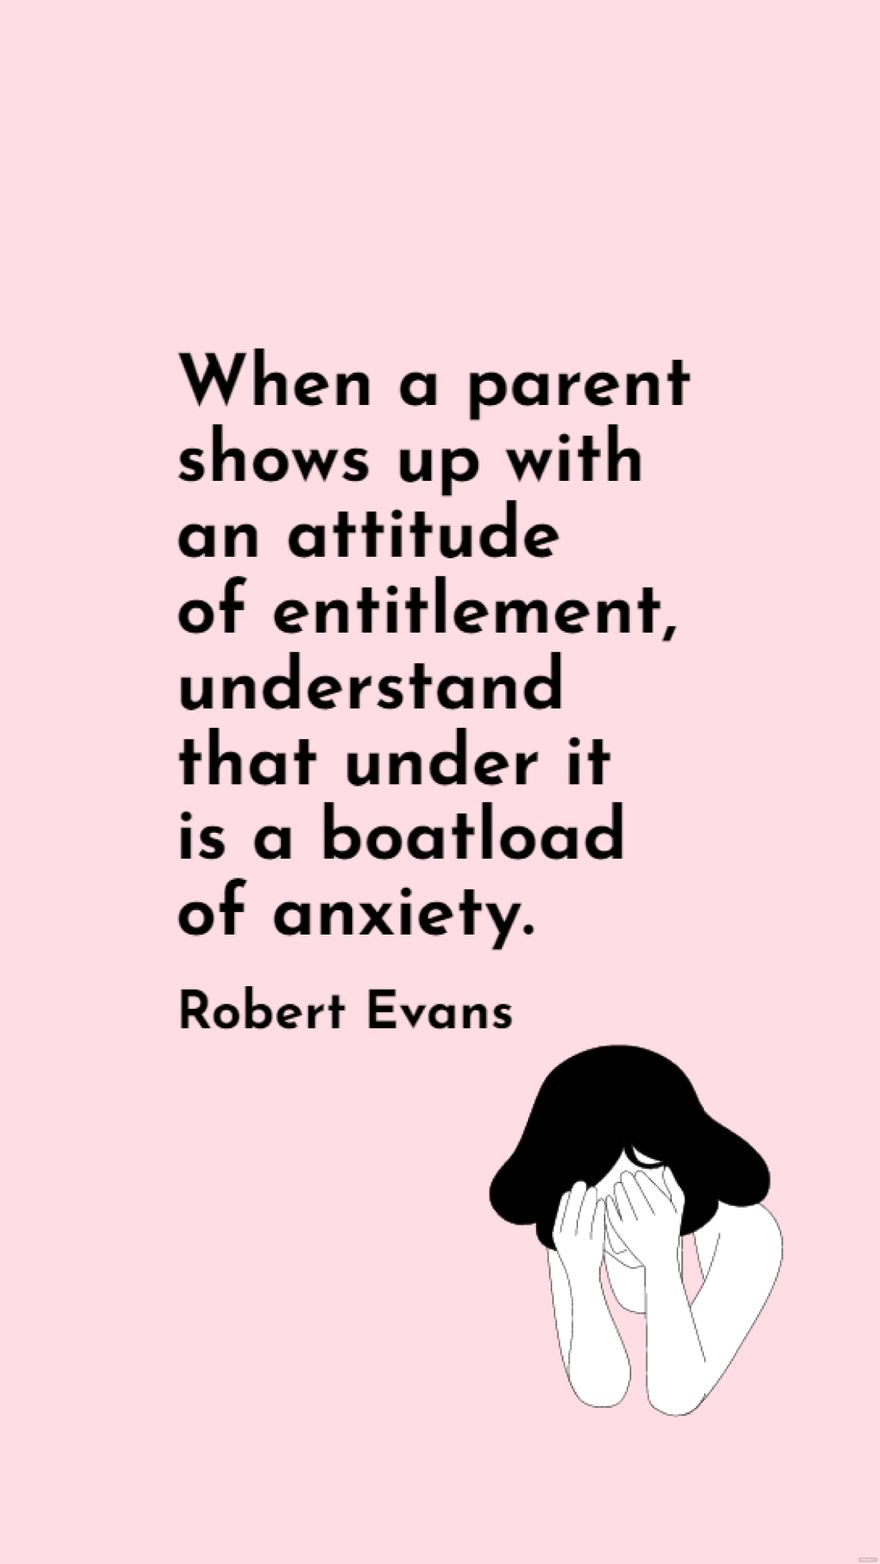 Robert Evans - When a parent shows up with an attitude of entitlement, understand that under it is a boatload of anxiety. in JPG